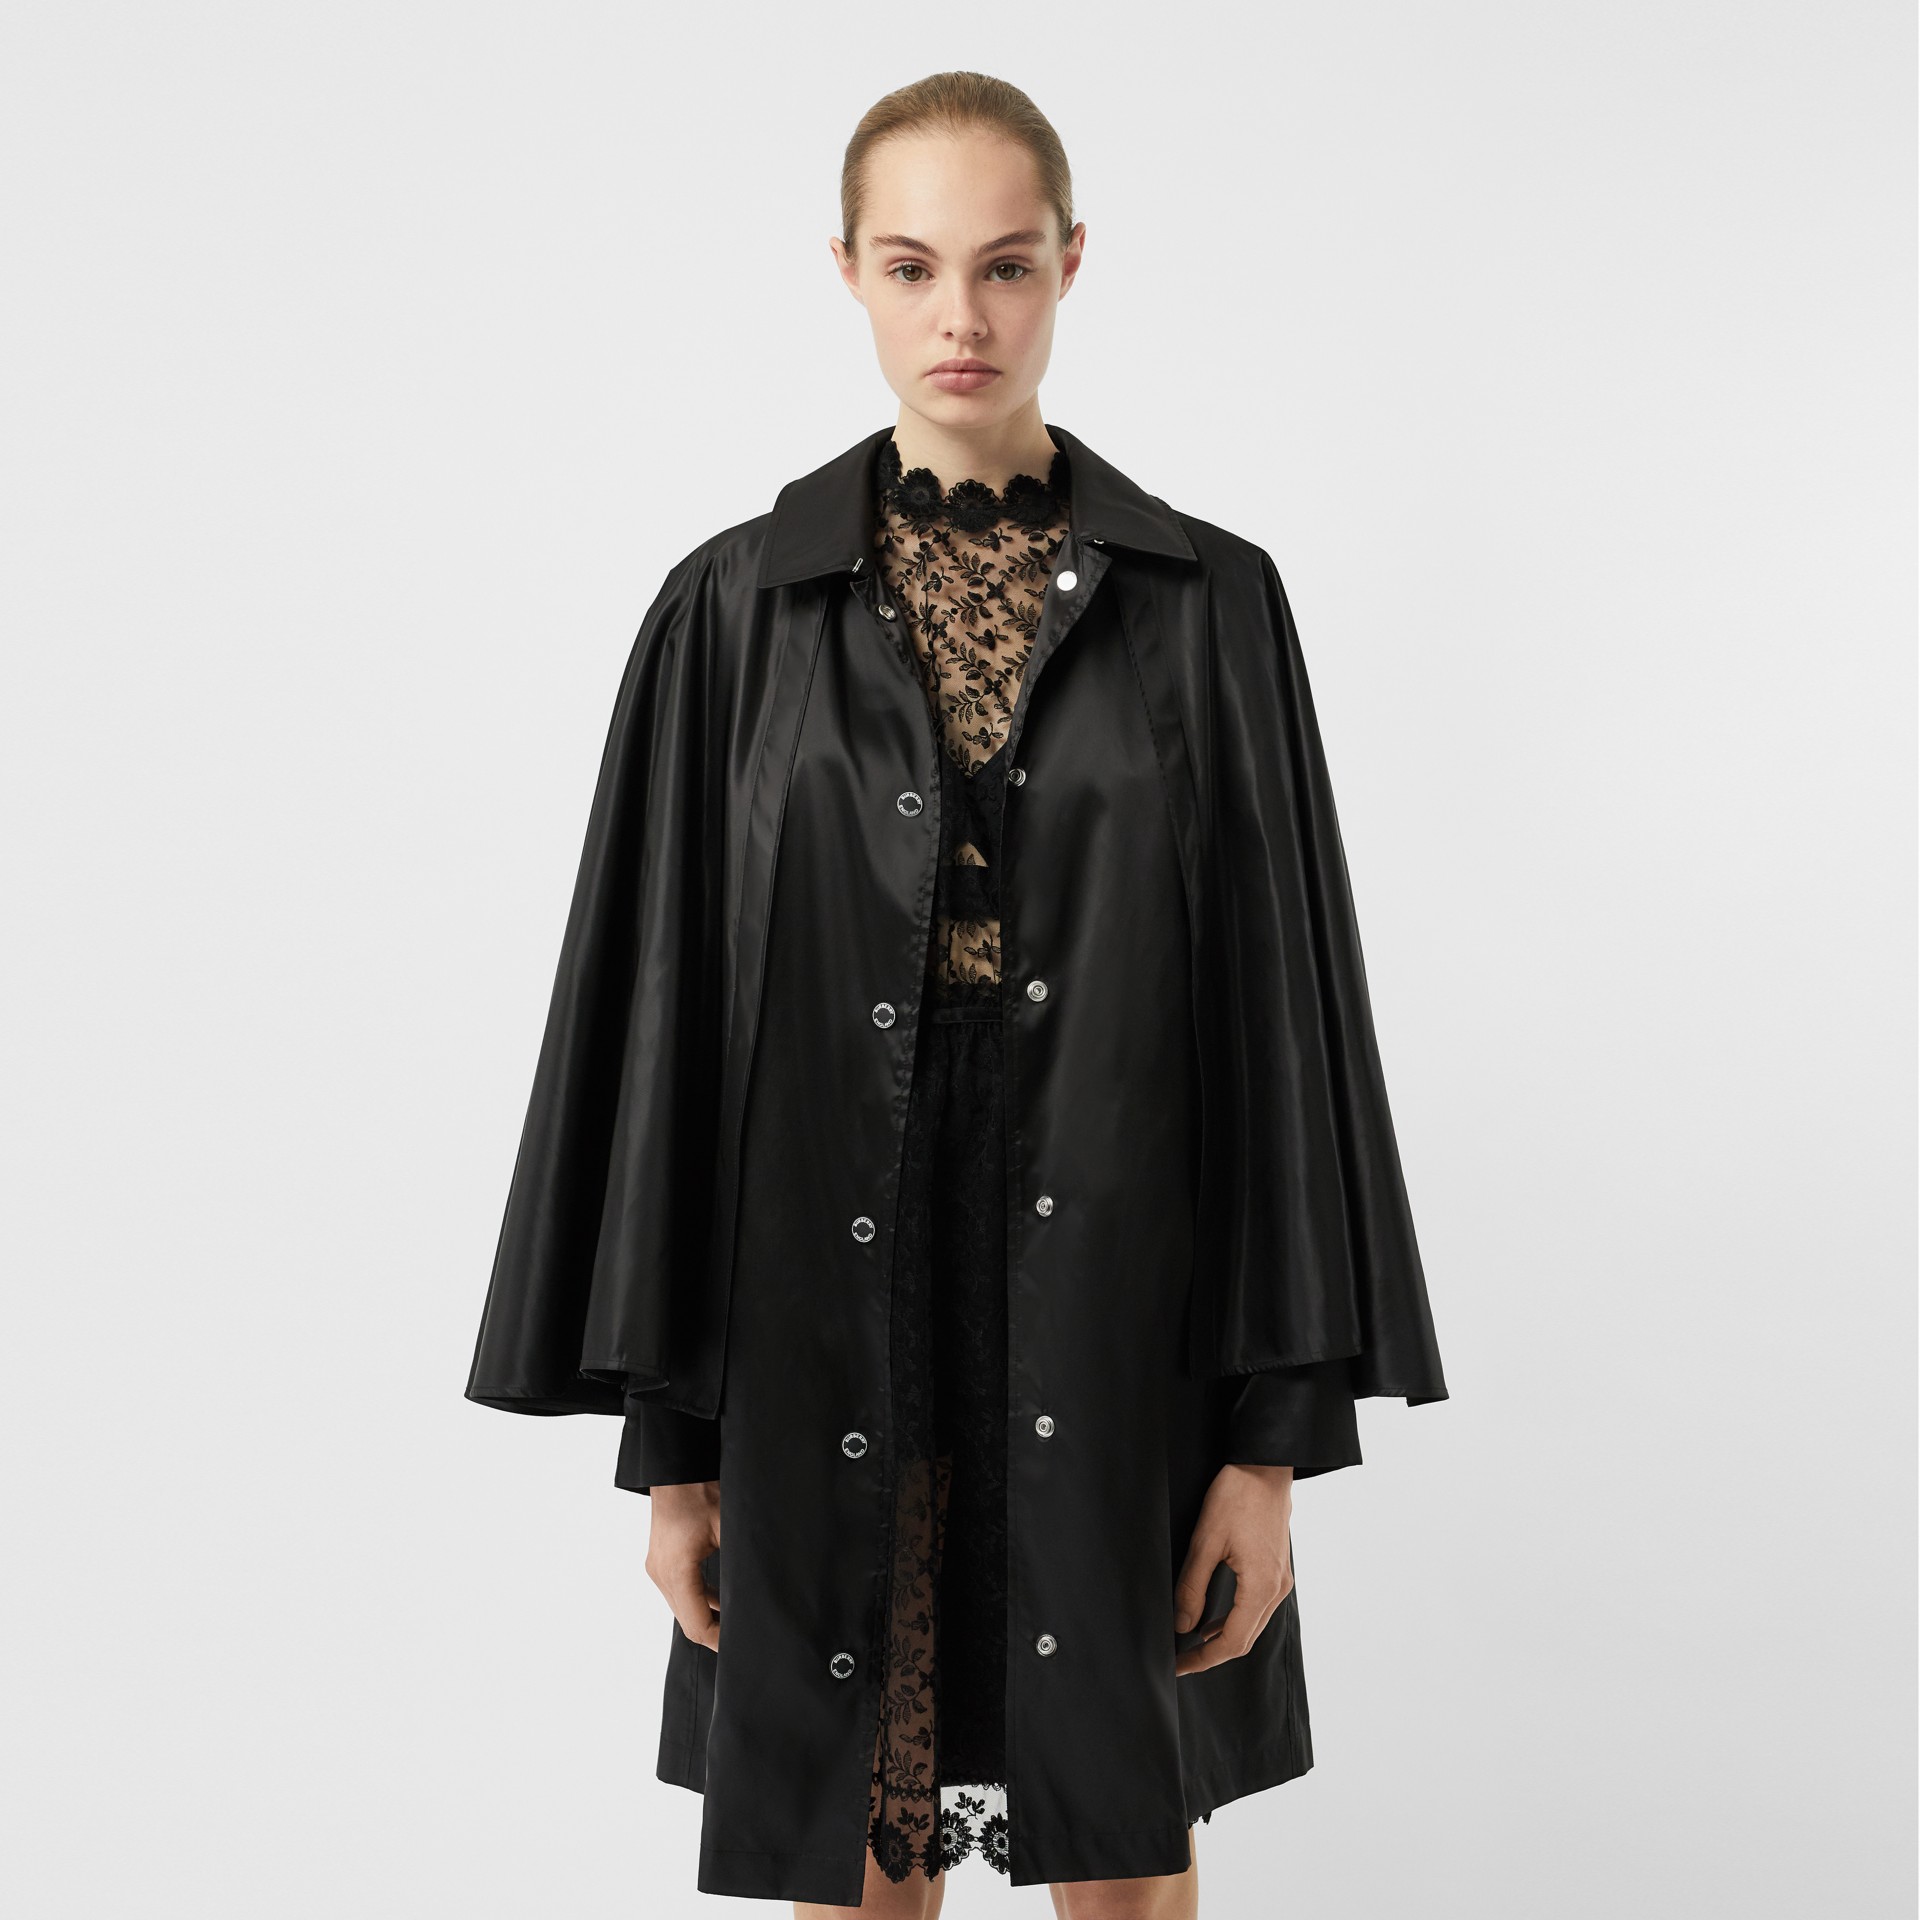 Cape Detail ECONYL® Belted Coat in Black - Women | Burberry United States